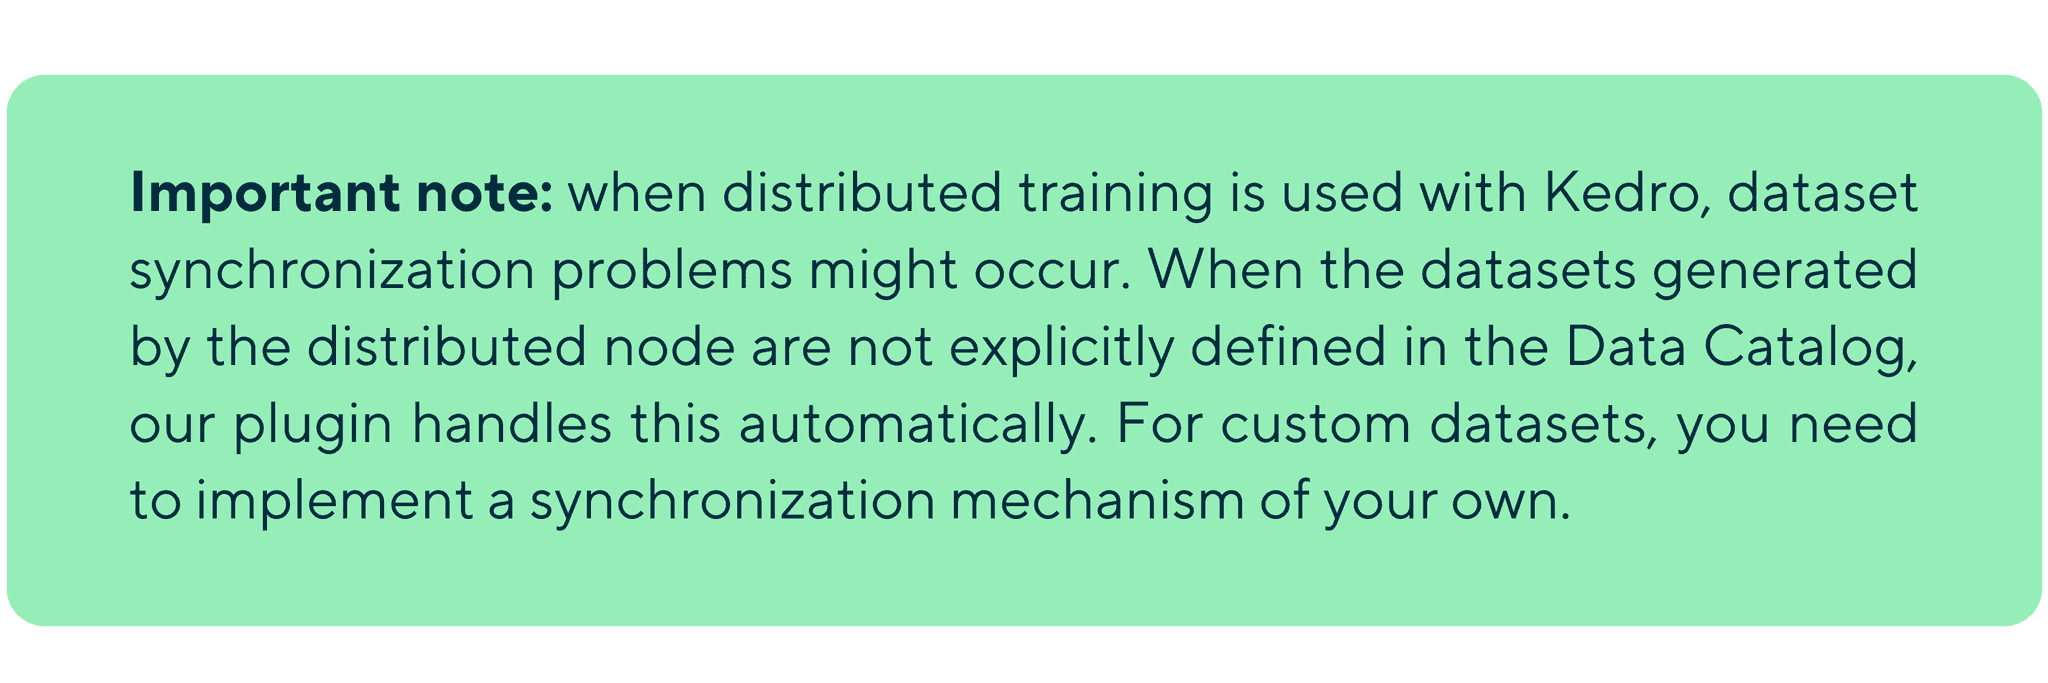 important note when distributed training is used with kedro dataset synchronization problems might occur  when the datasets generated by the distributed node are not explicitly defined in the data catalog our plugi 2 